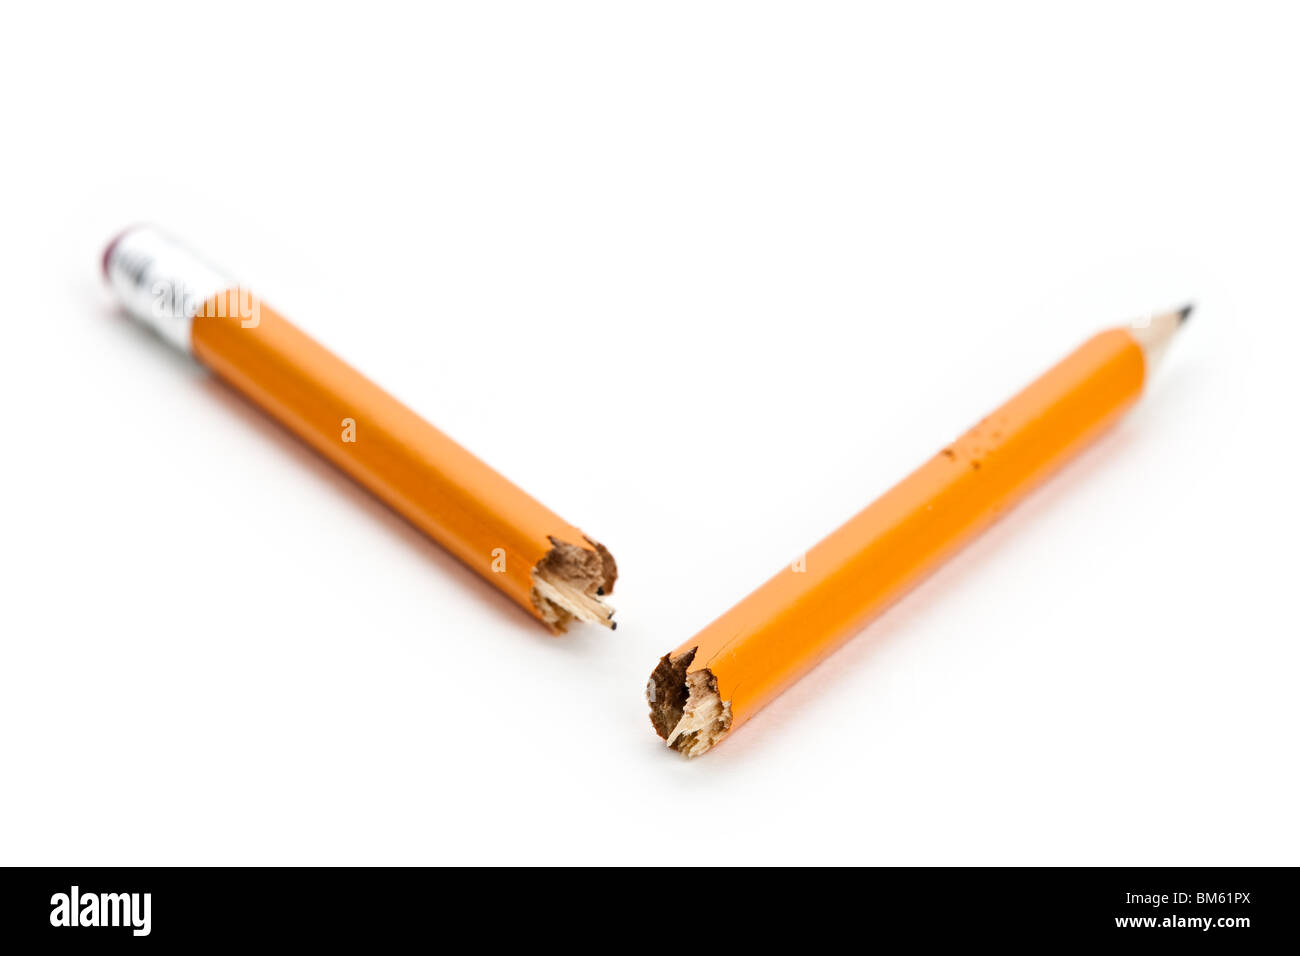 Broken Pencil with white background Stock Photo